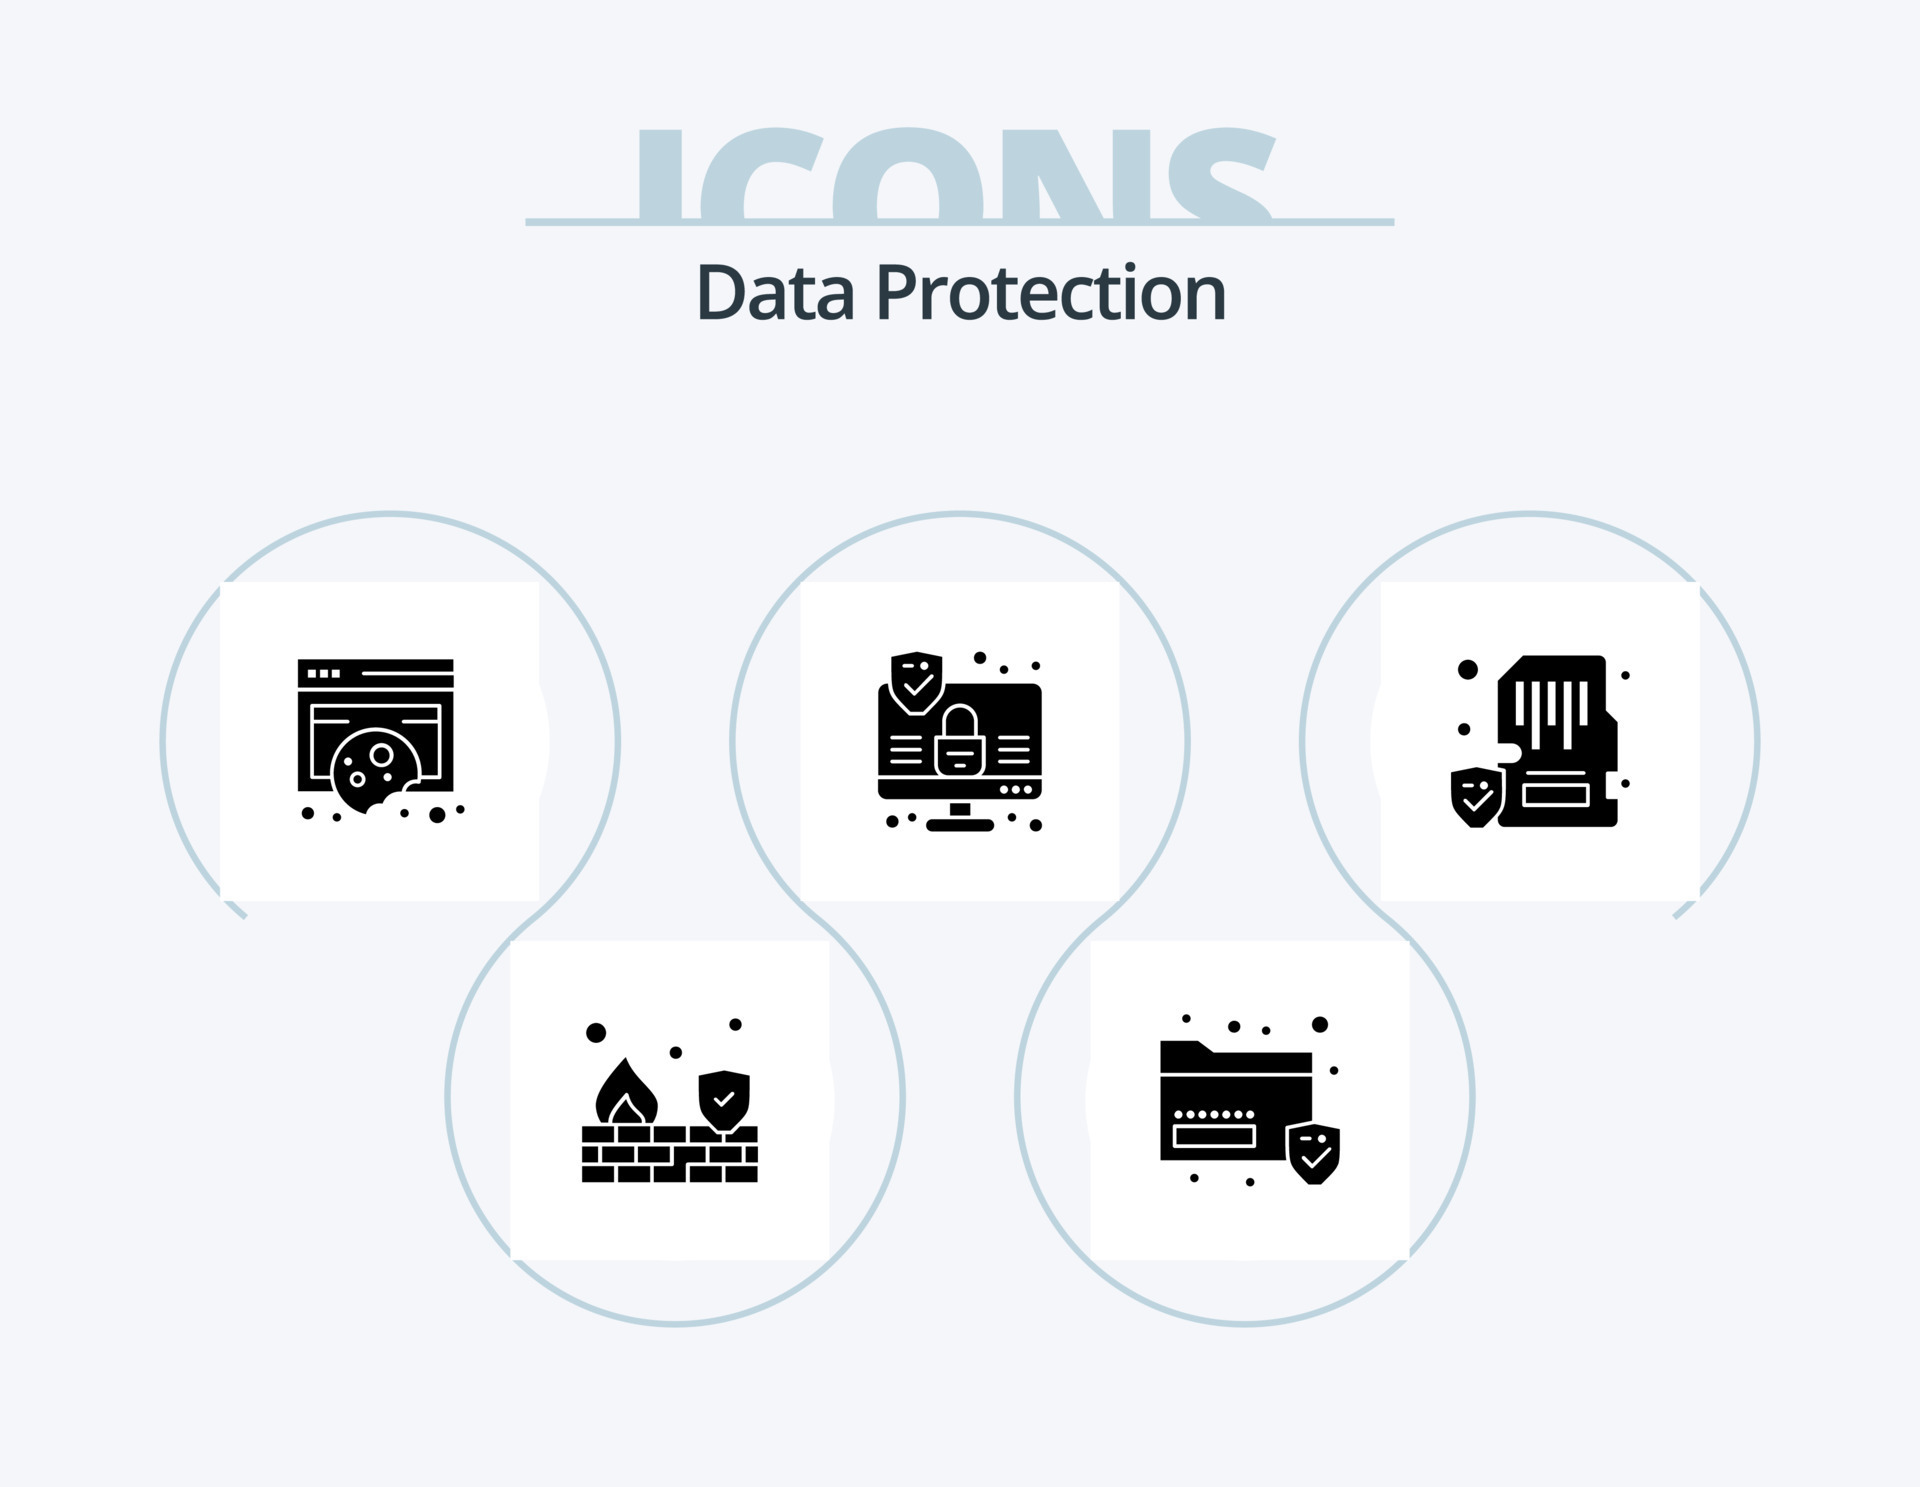 Data privacy - Free security icons